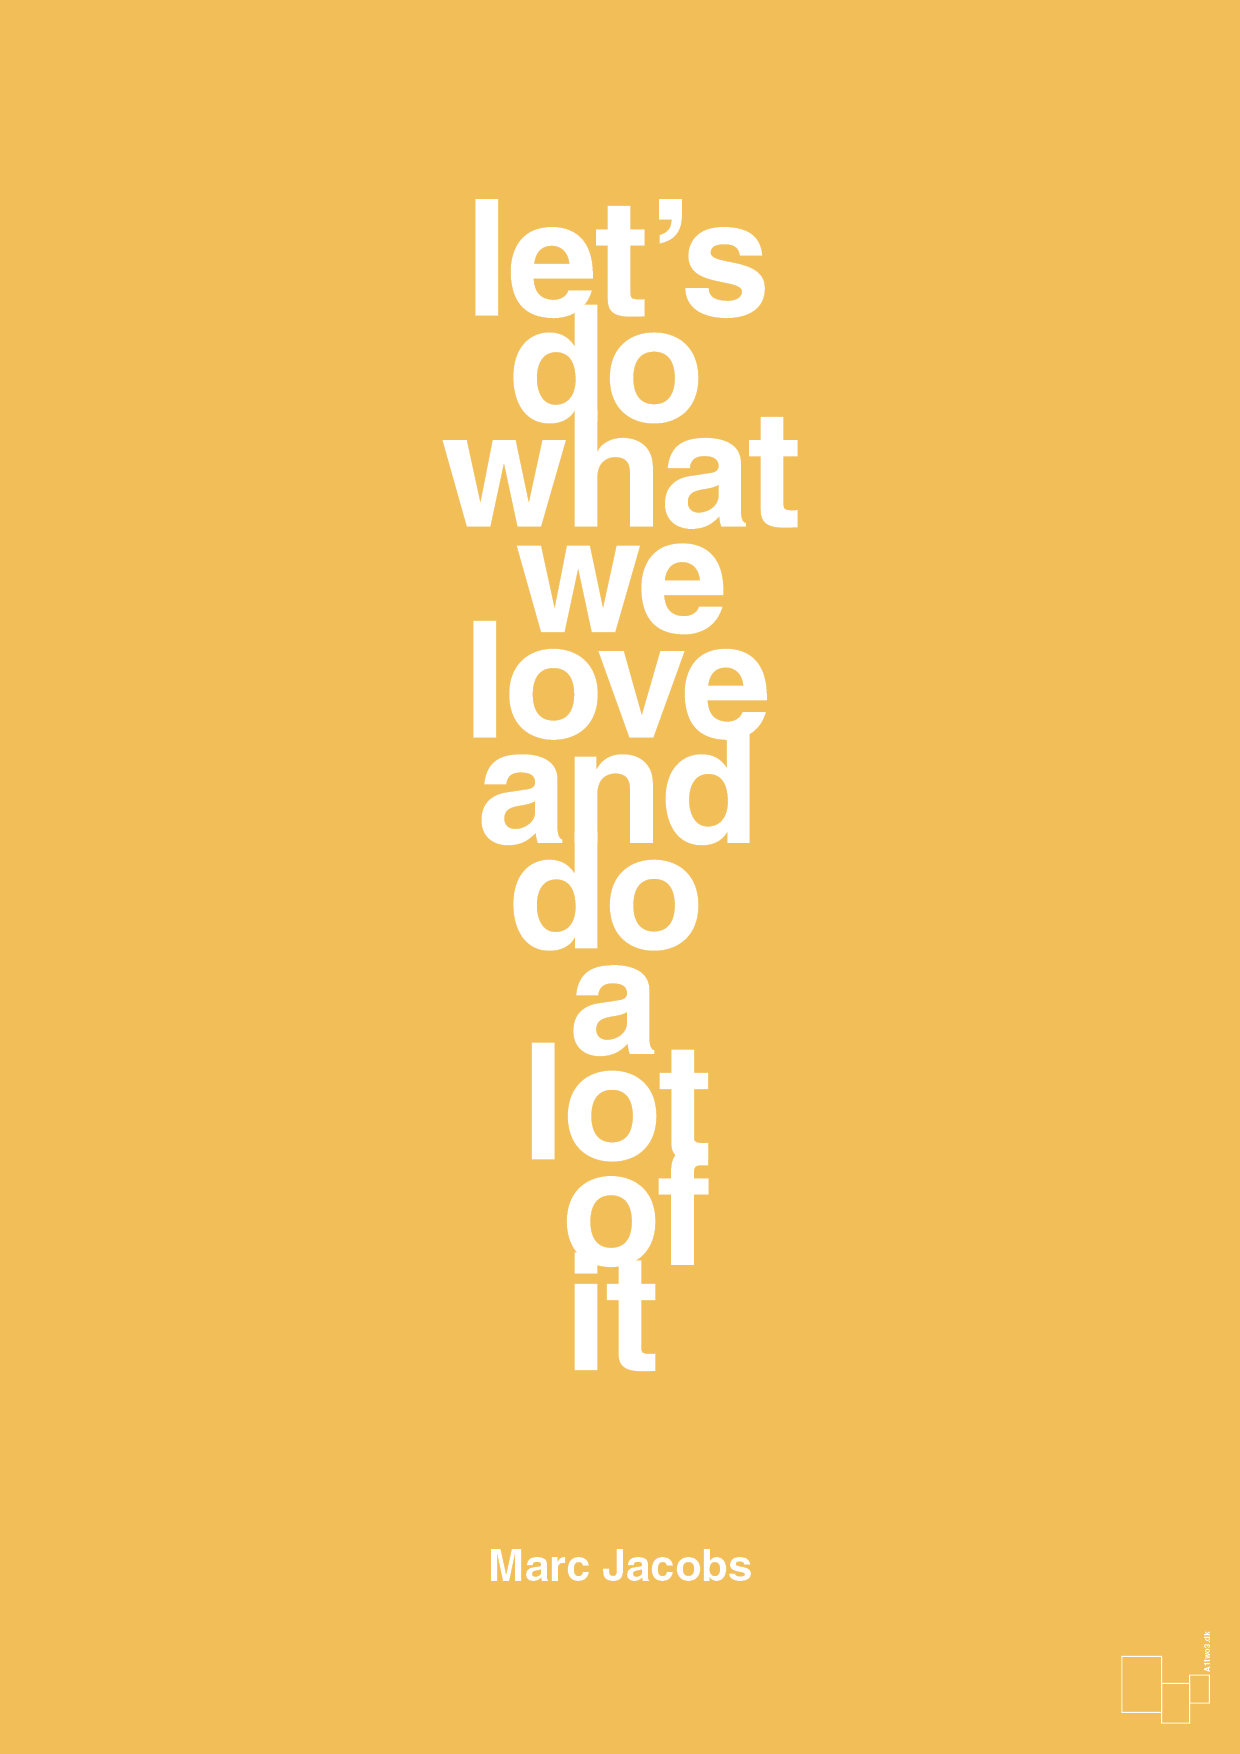 lets do what we love and do a lot of it - Plakat med Citater i Honeycomb